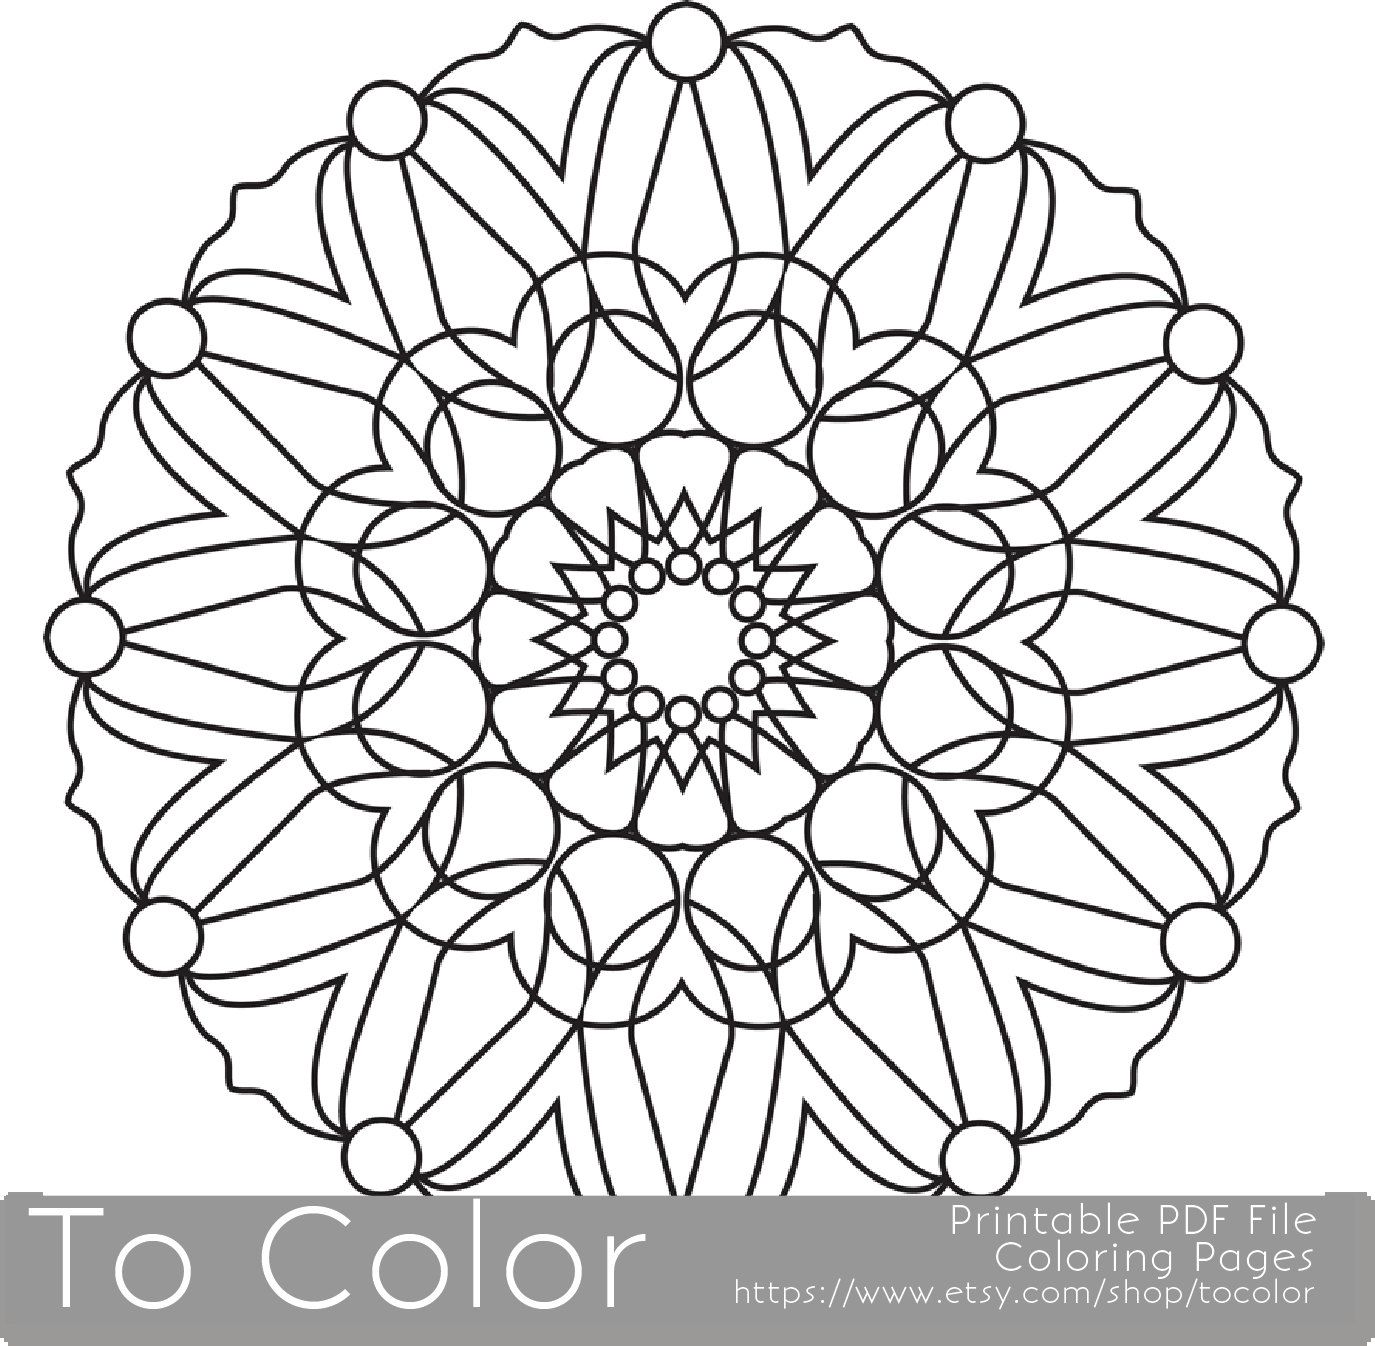 Popular items for grown up coloring on Etsy